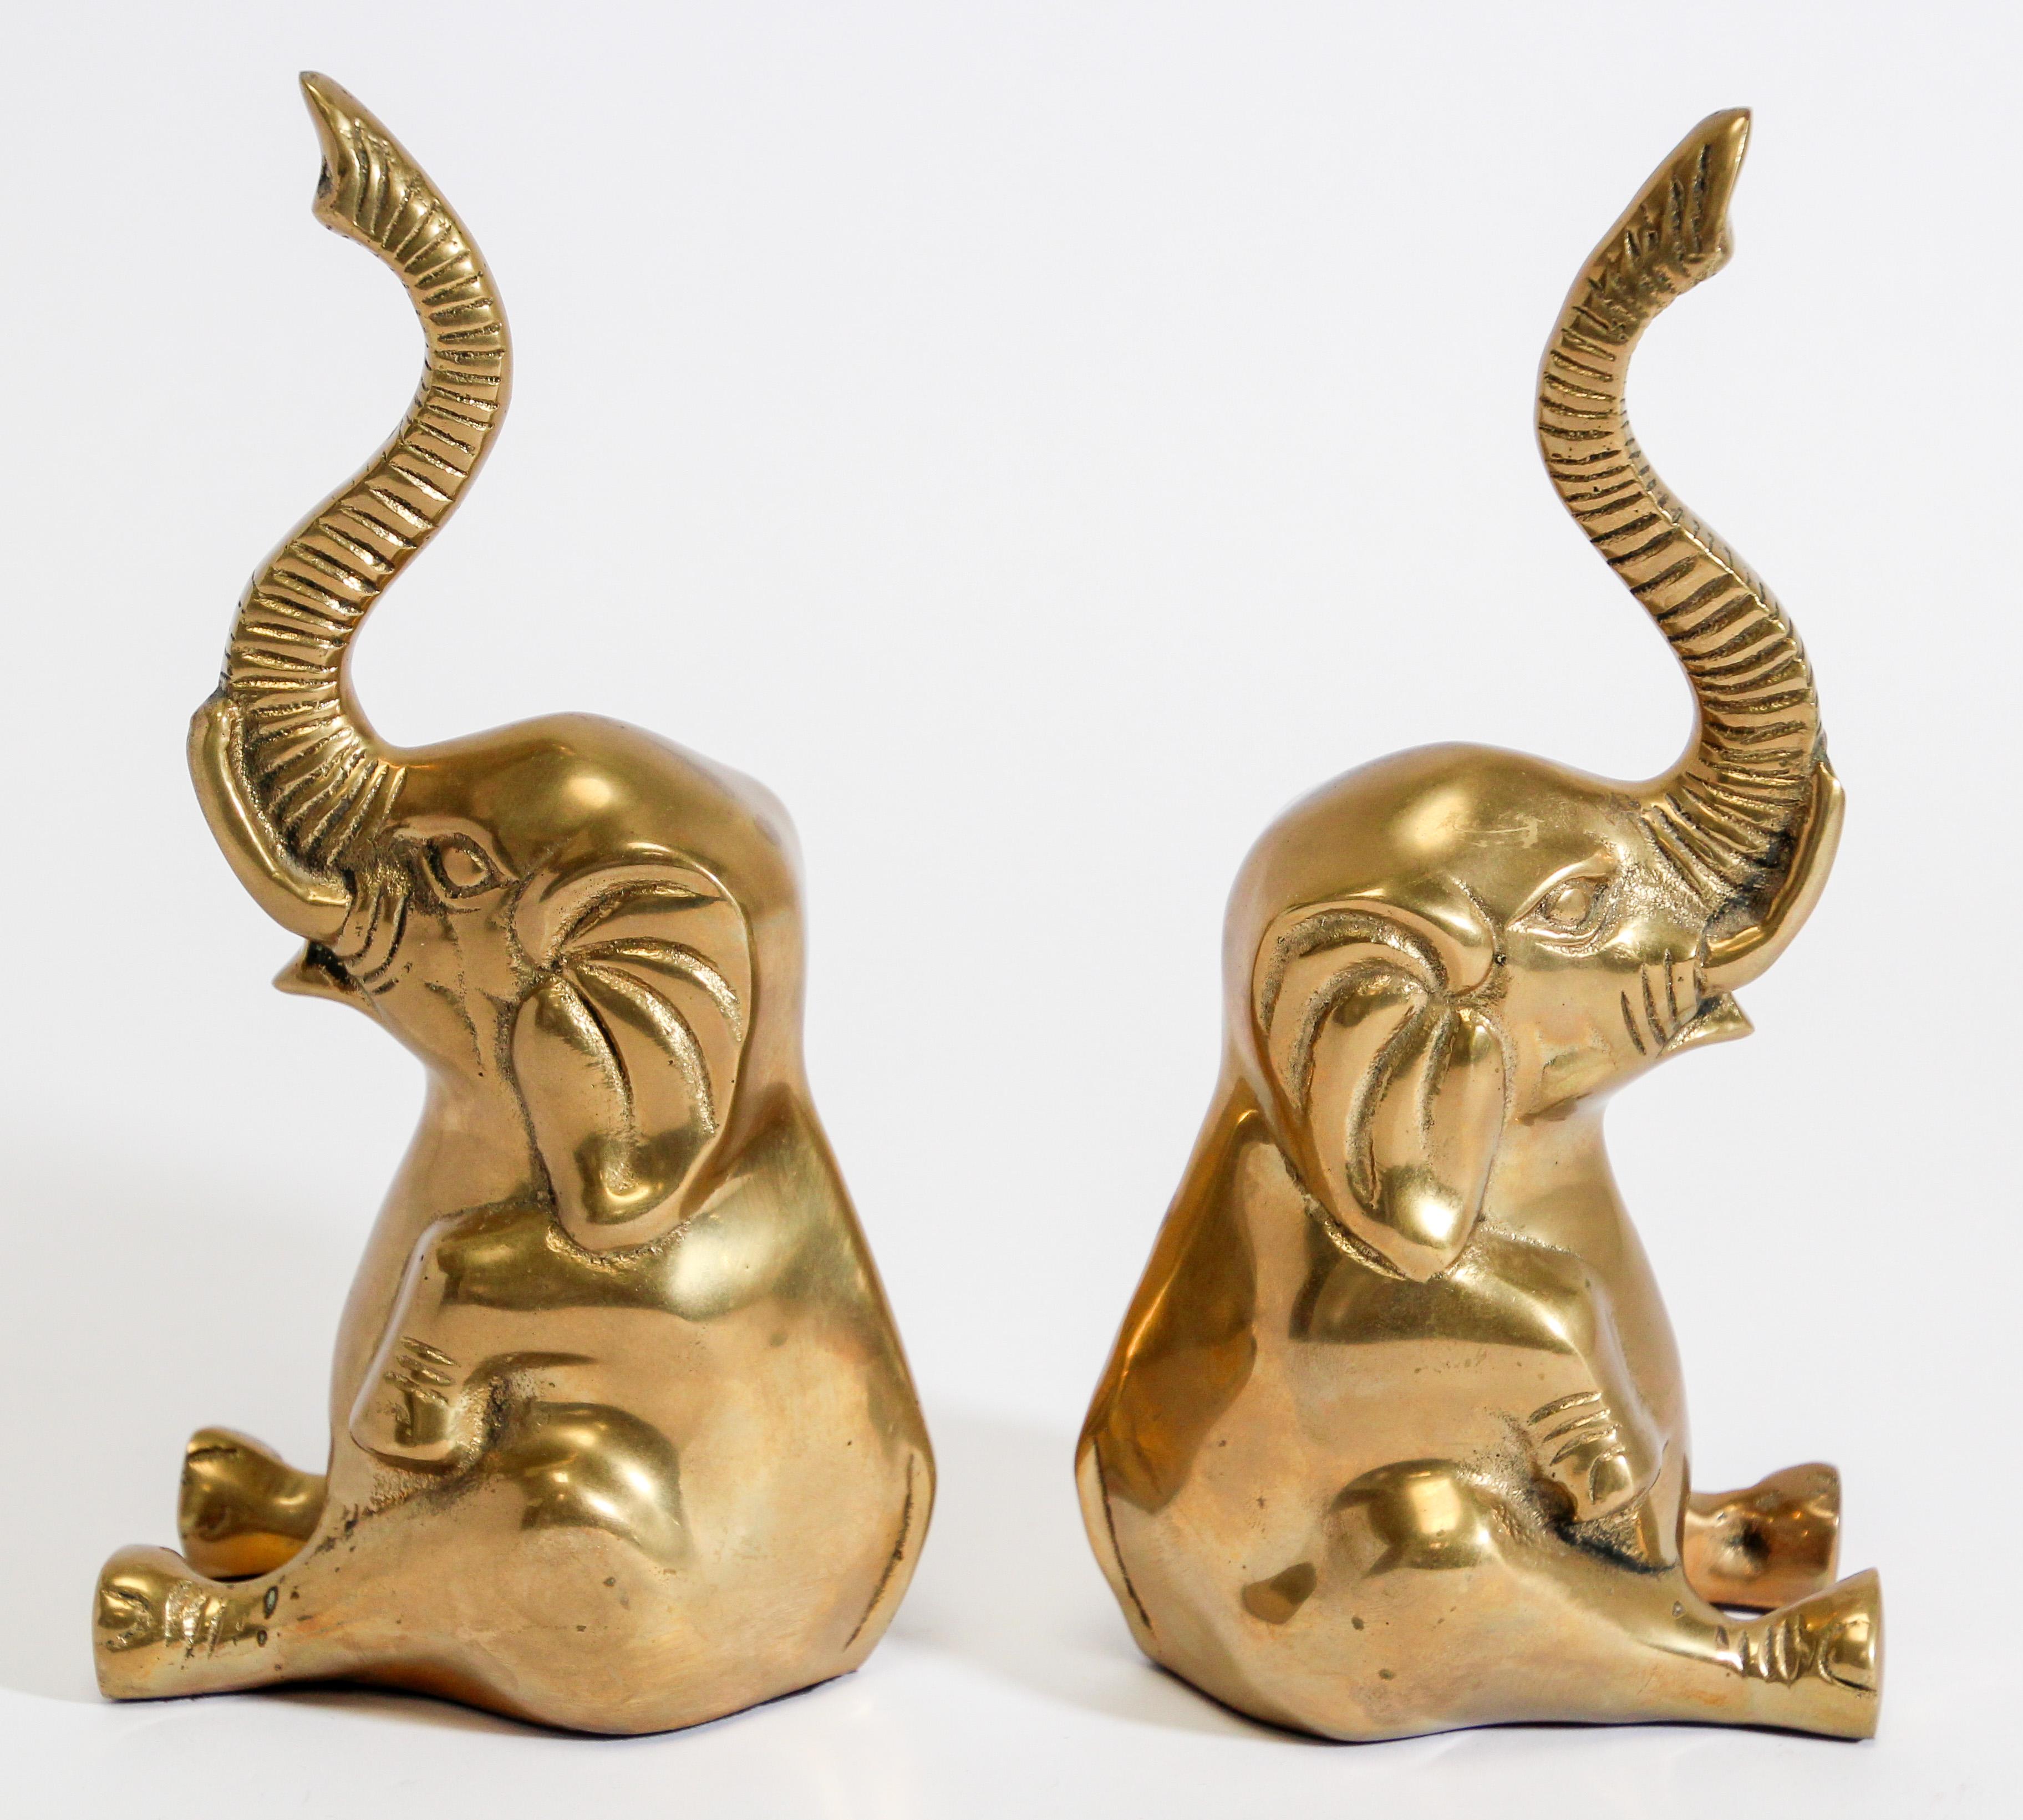 Vintage cast polished solid brass elephant sculpture paper weight or book ends.
The elephants are seated and their trunk is up for good luck. 
Lots of detail on the front and sides of the elephant.
Dimensions: 4